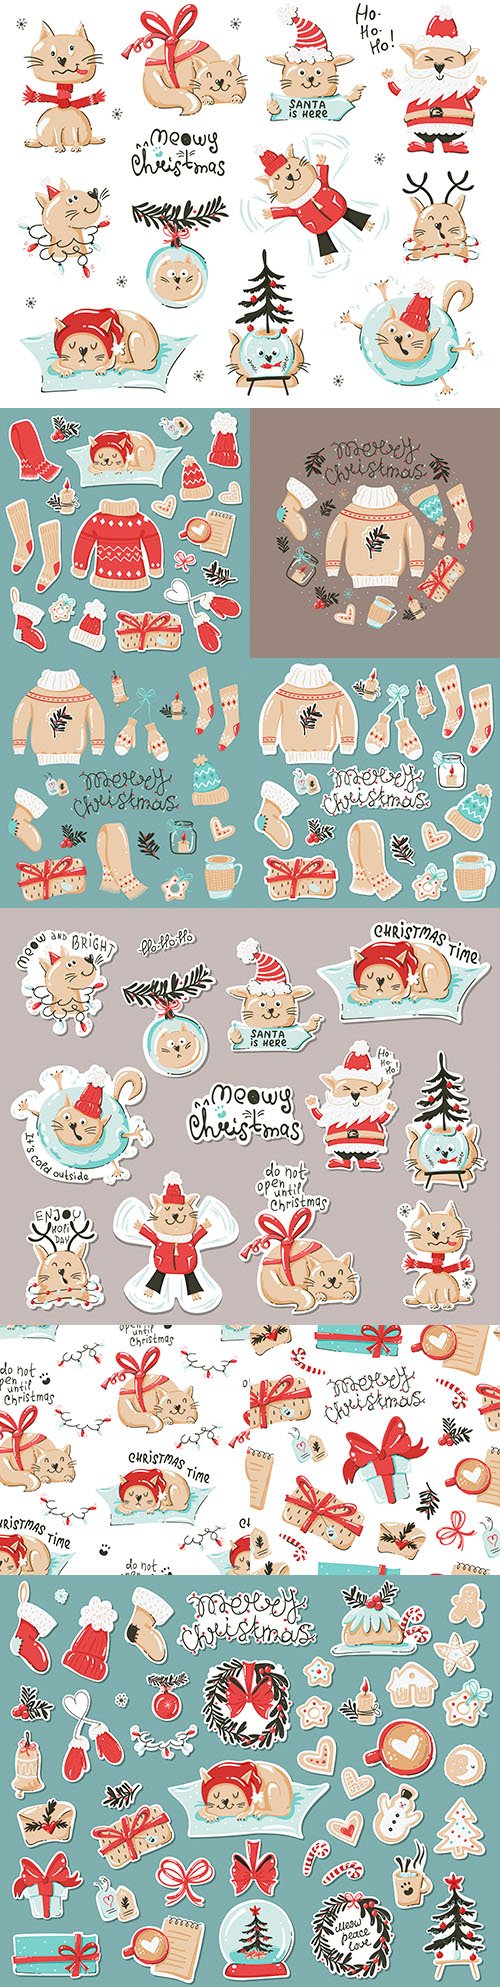 Fun animal label set with Christmas elements design